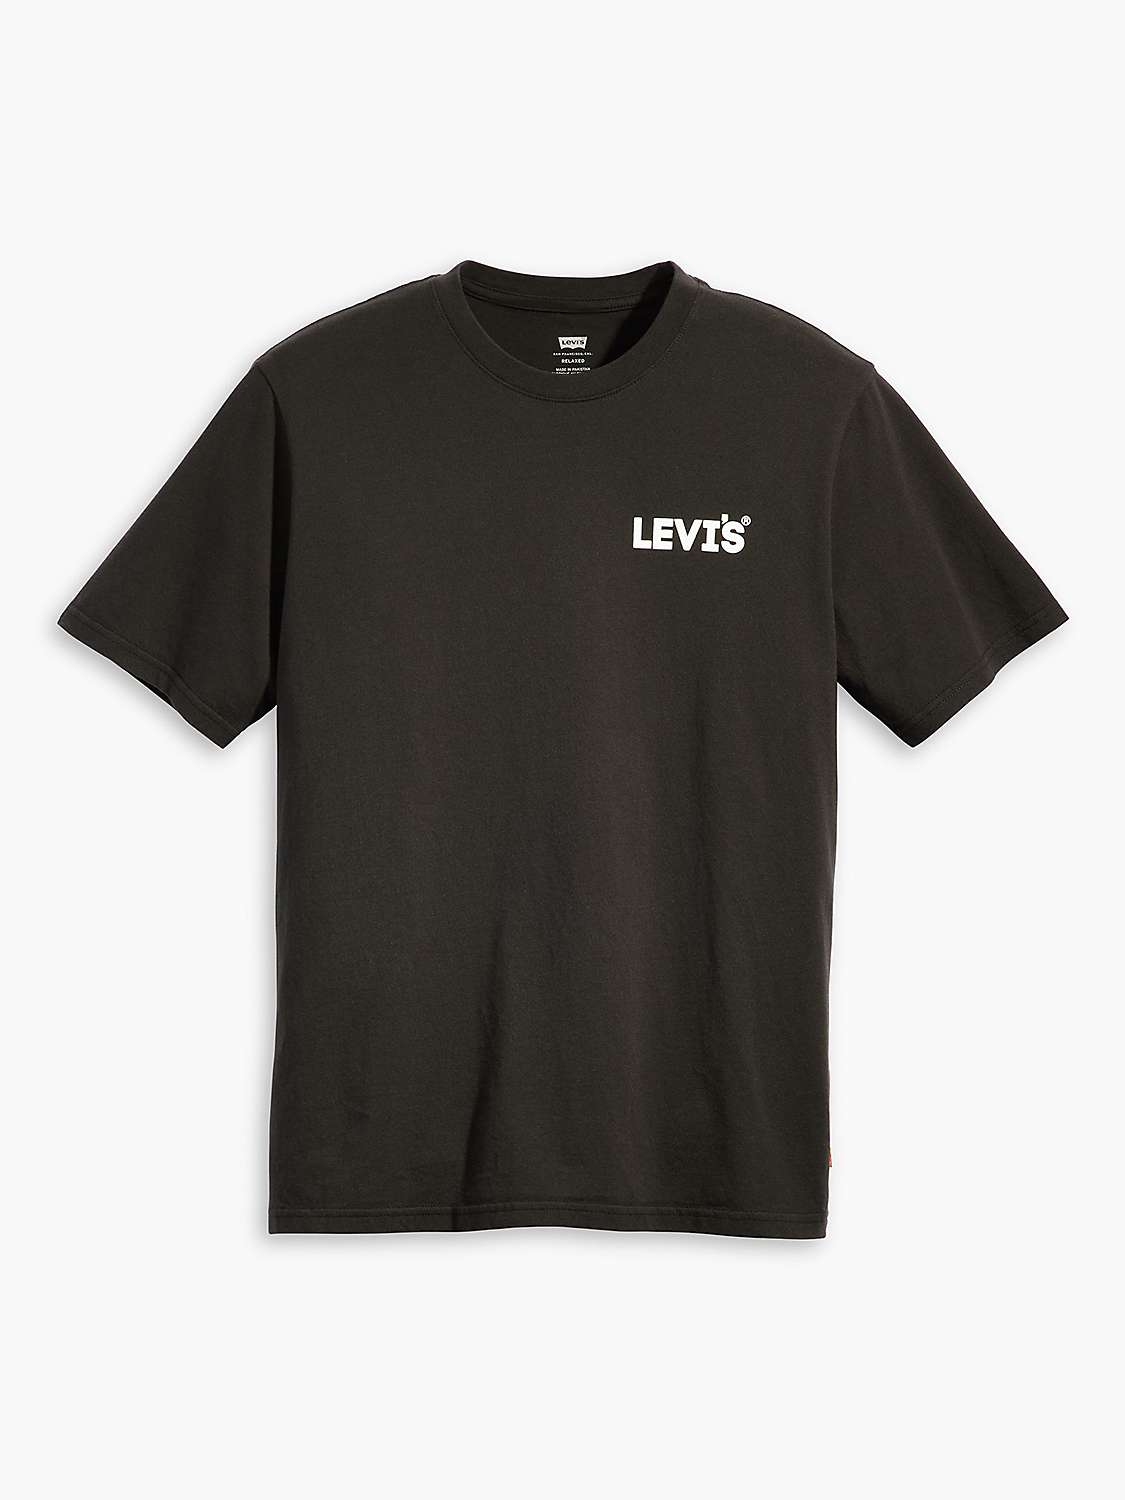 Buy Levi's Relaxed Fit Short Sleeve Graphic T-Shirt, Caviar Online at johnlewis.com